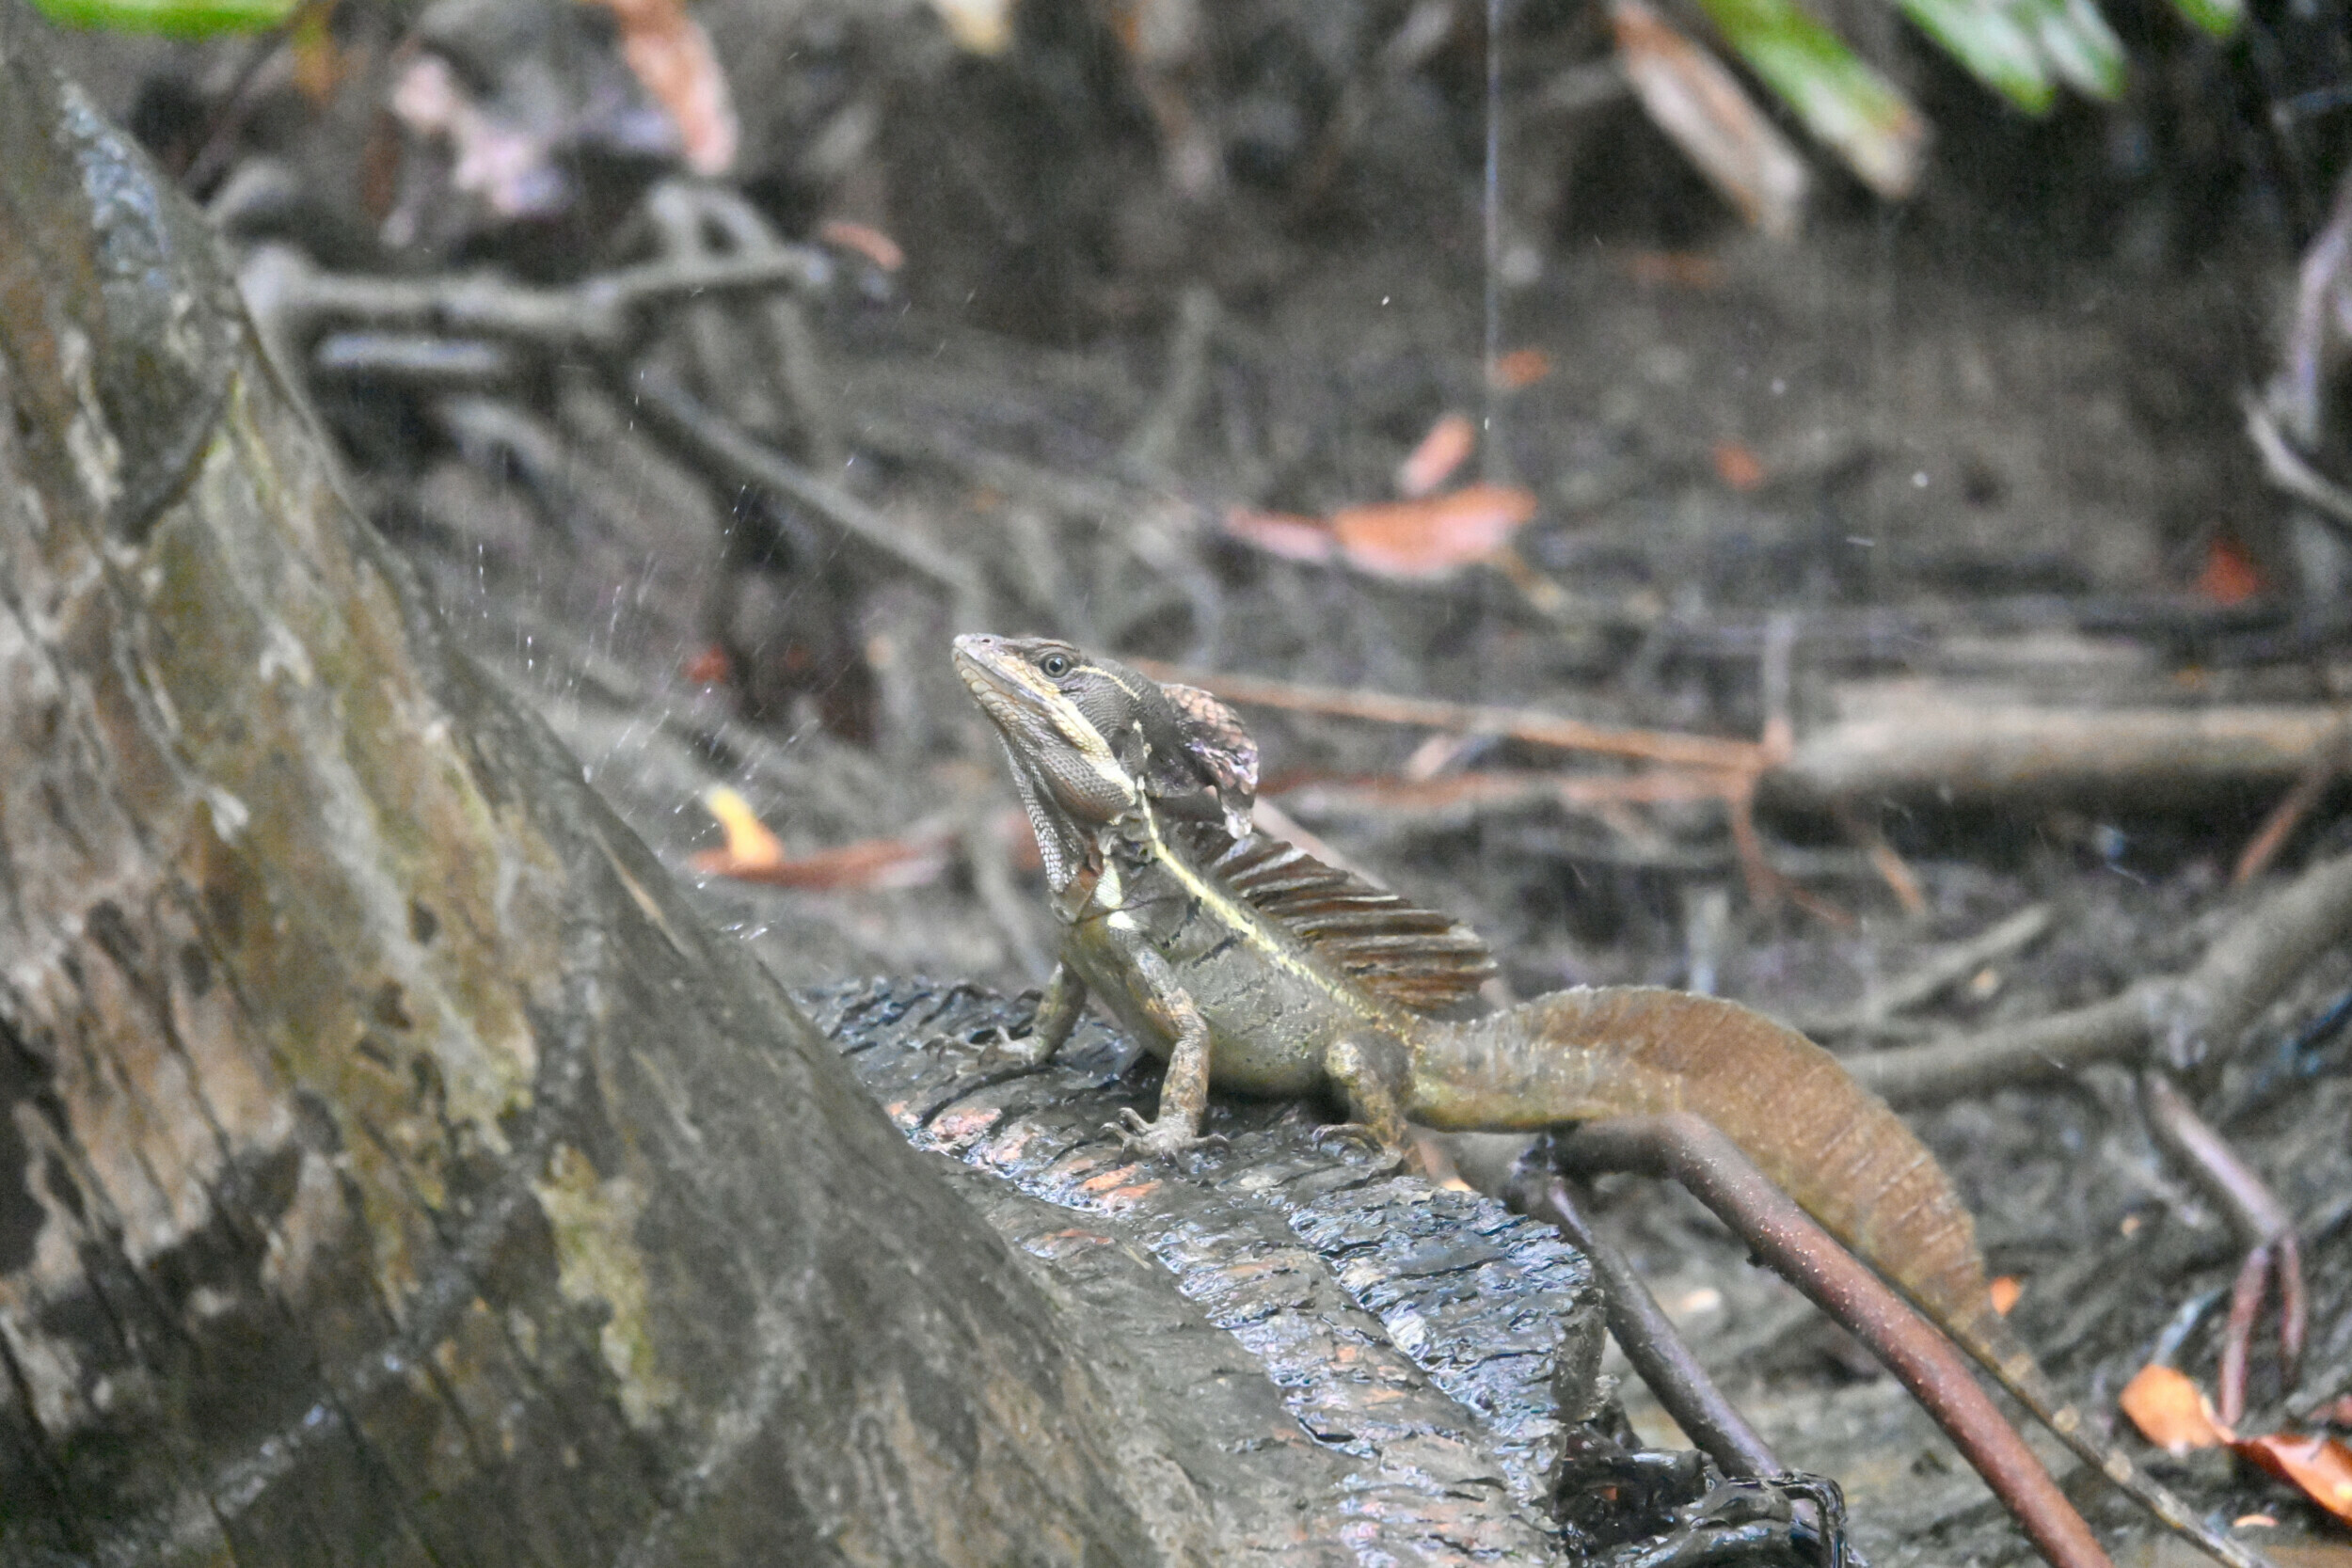 A common basilisk lizard, known for its ability to run on water, rests on a log in the rain at Damas Mangrove.